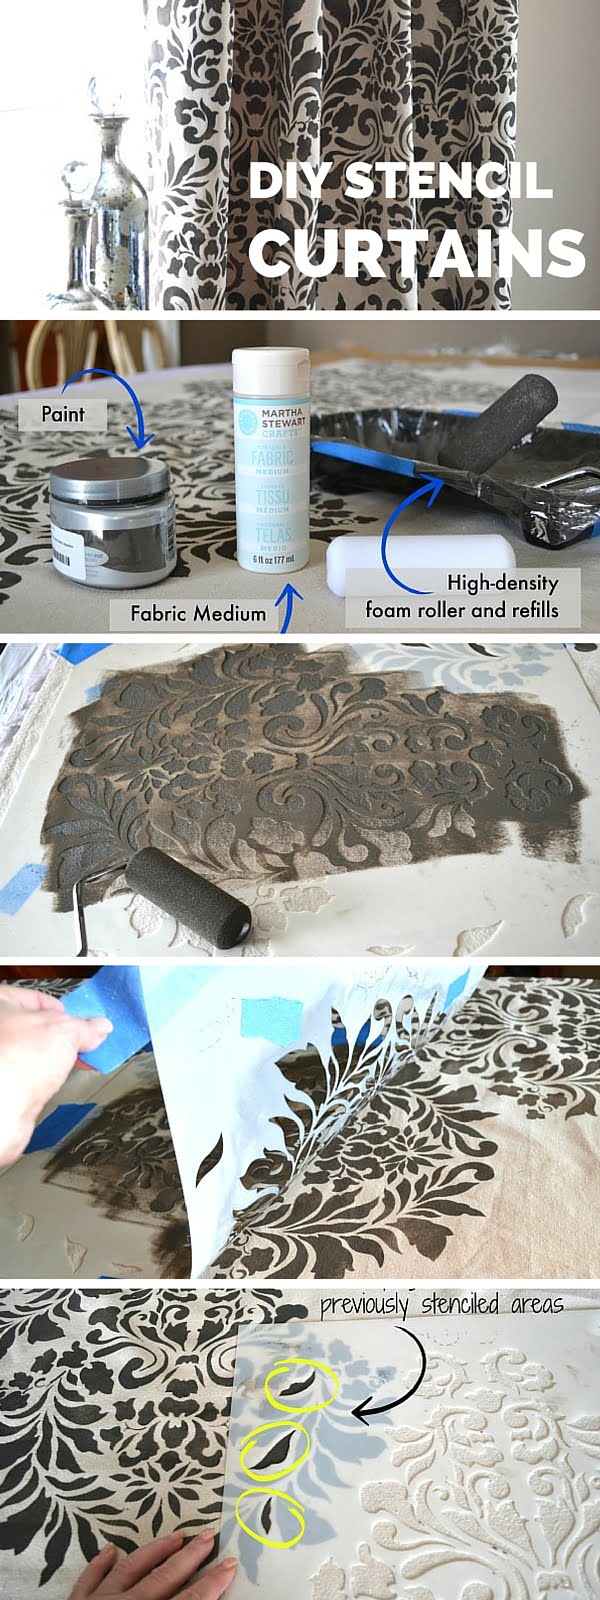  Stencil Curtains that looks so easy to make and look so good. Check it out! 